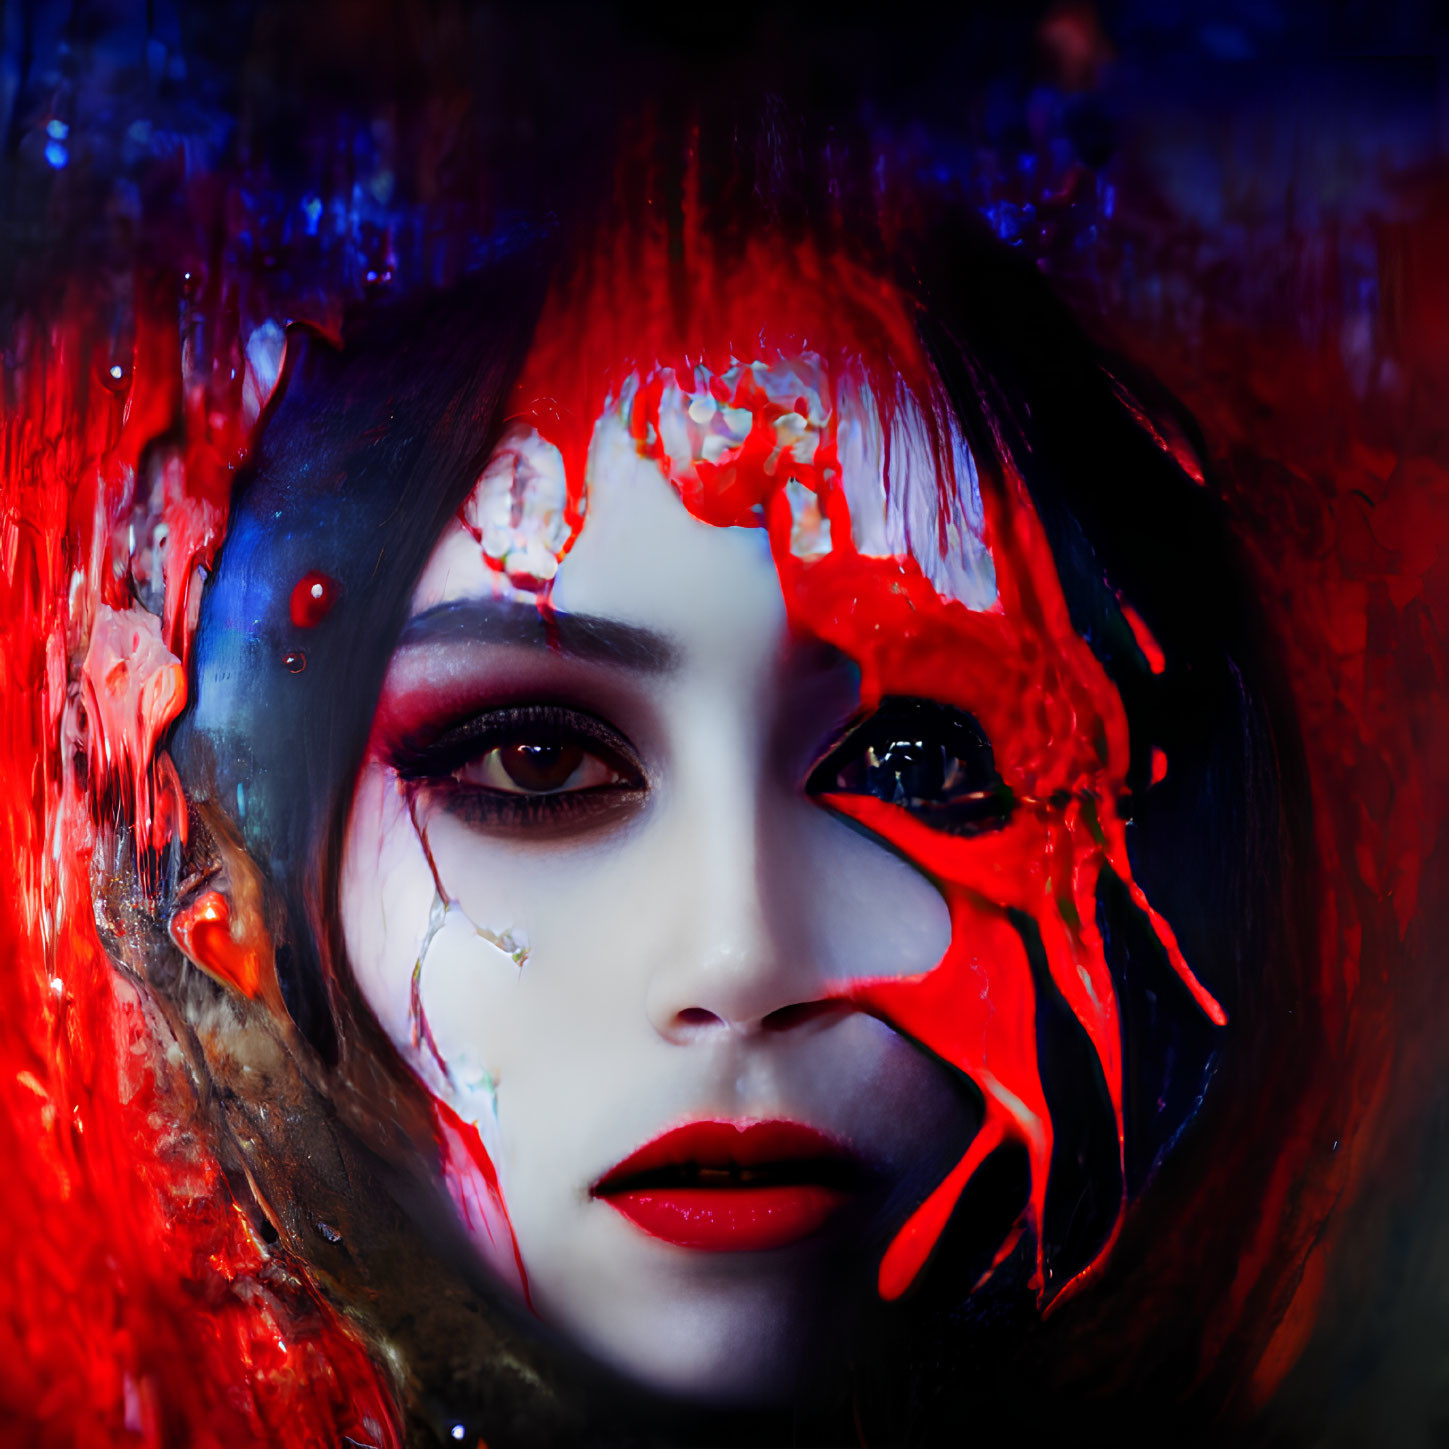 Person with Dramatic Red and White Makeup for Intense Artistic Portrait